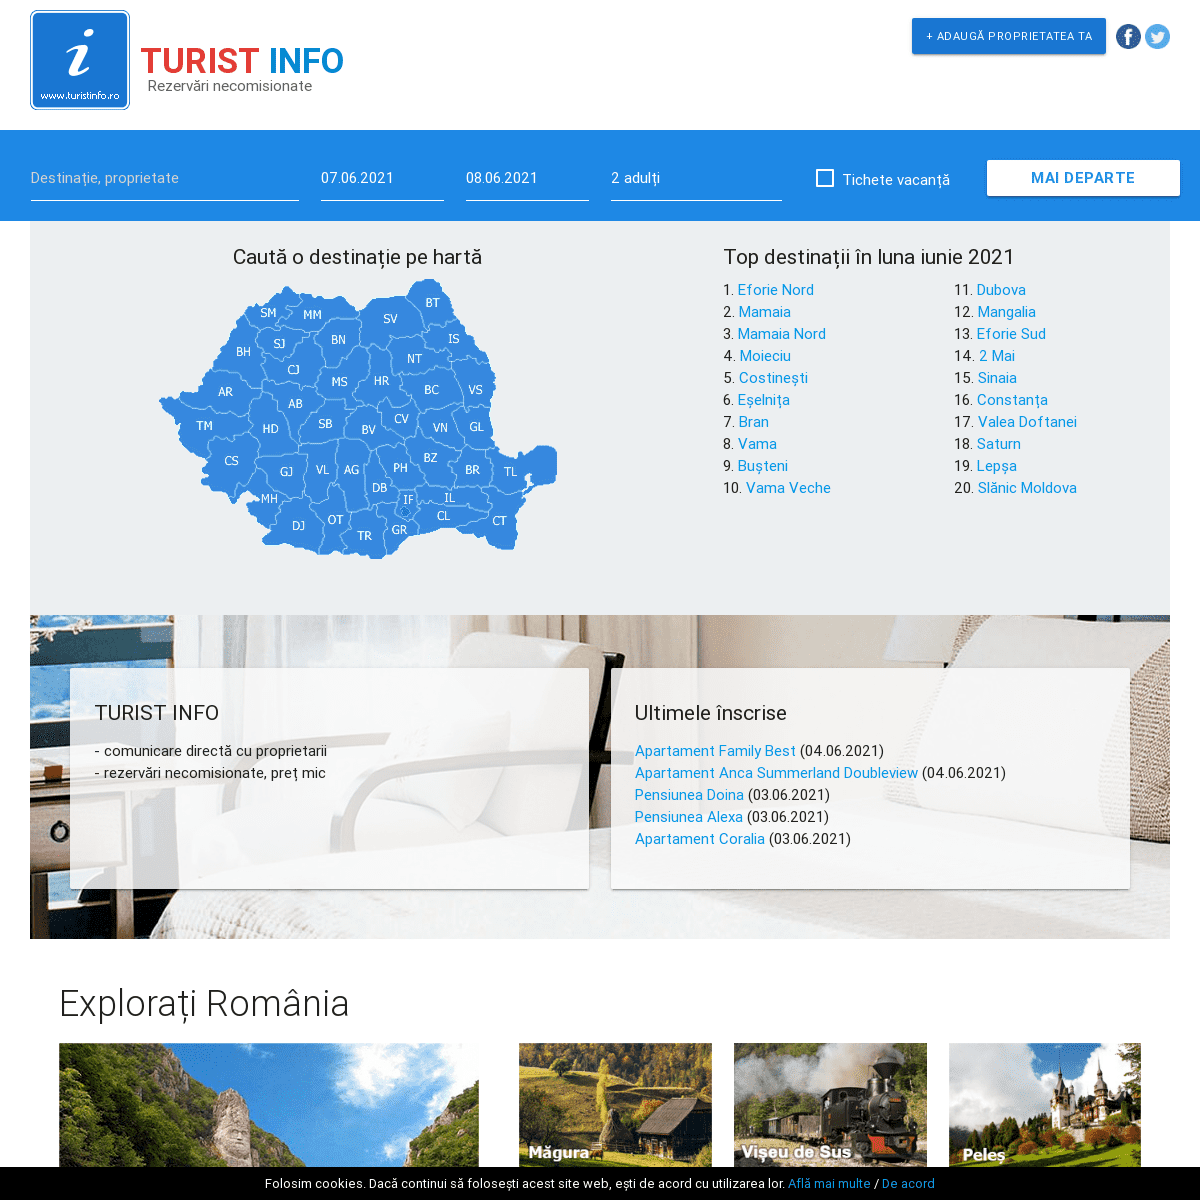 A complete backup of https://turistinfo.ro